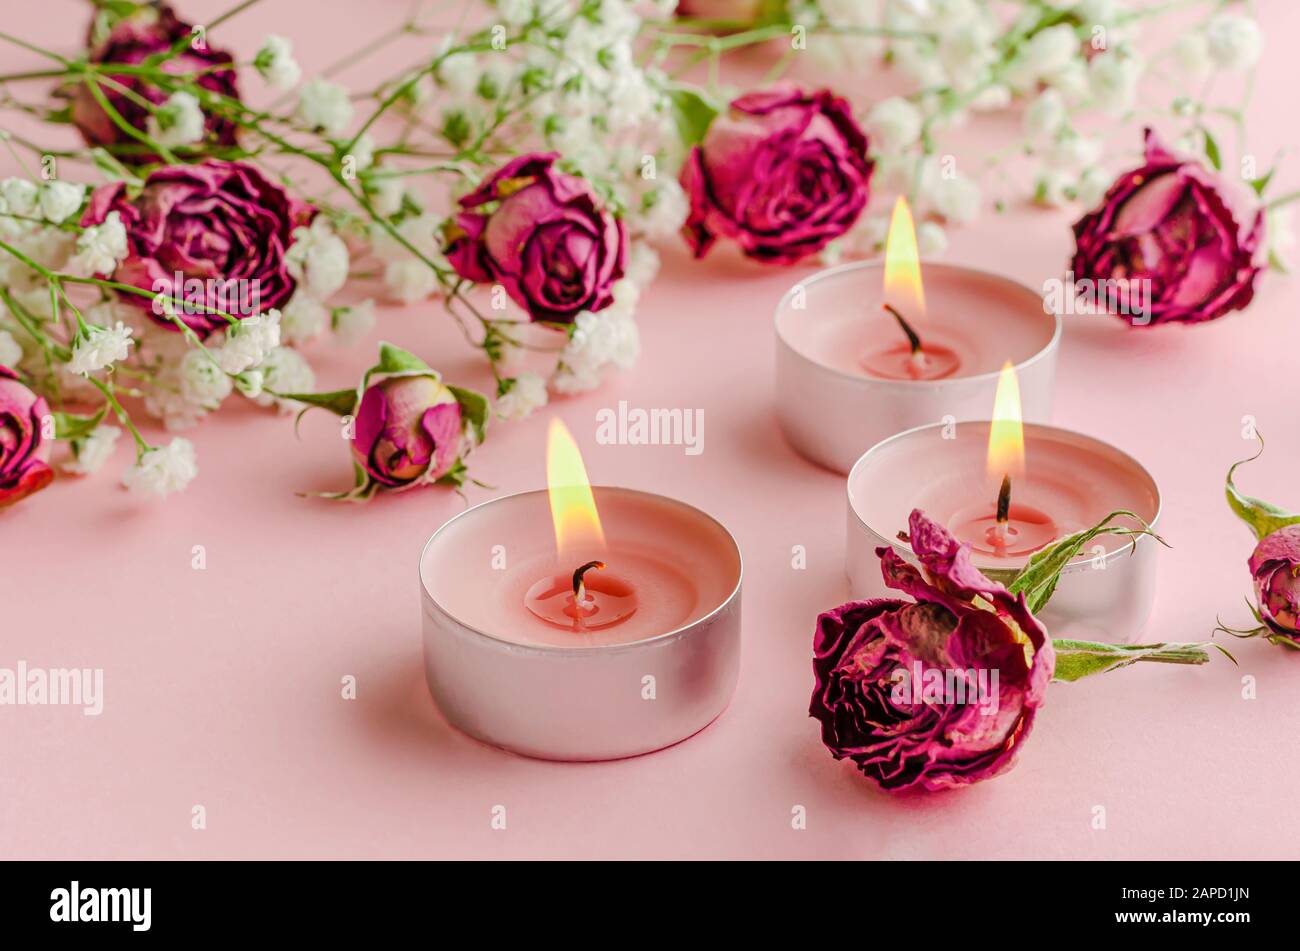 Burning aroma candles and dried roses on pink background. Aromatherapy and romance concept. Stock Photo